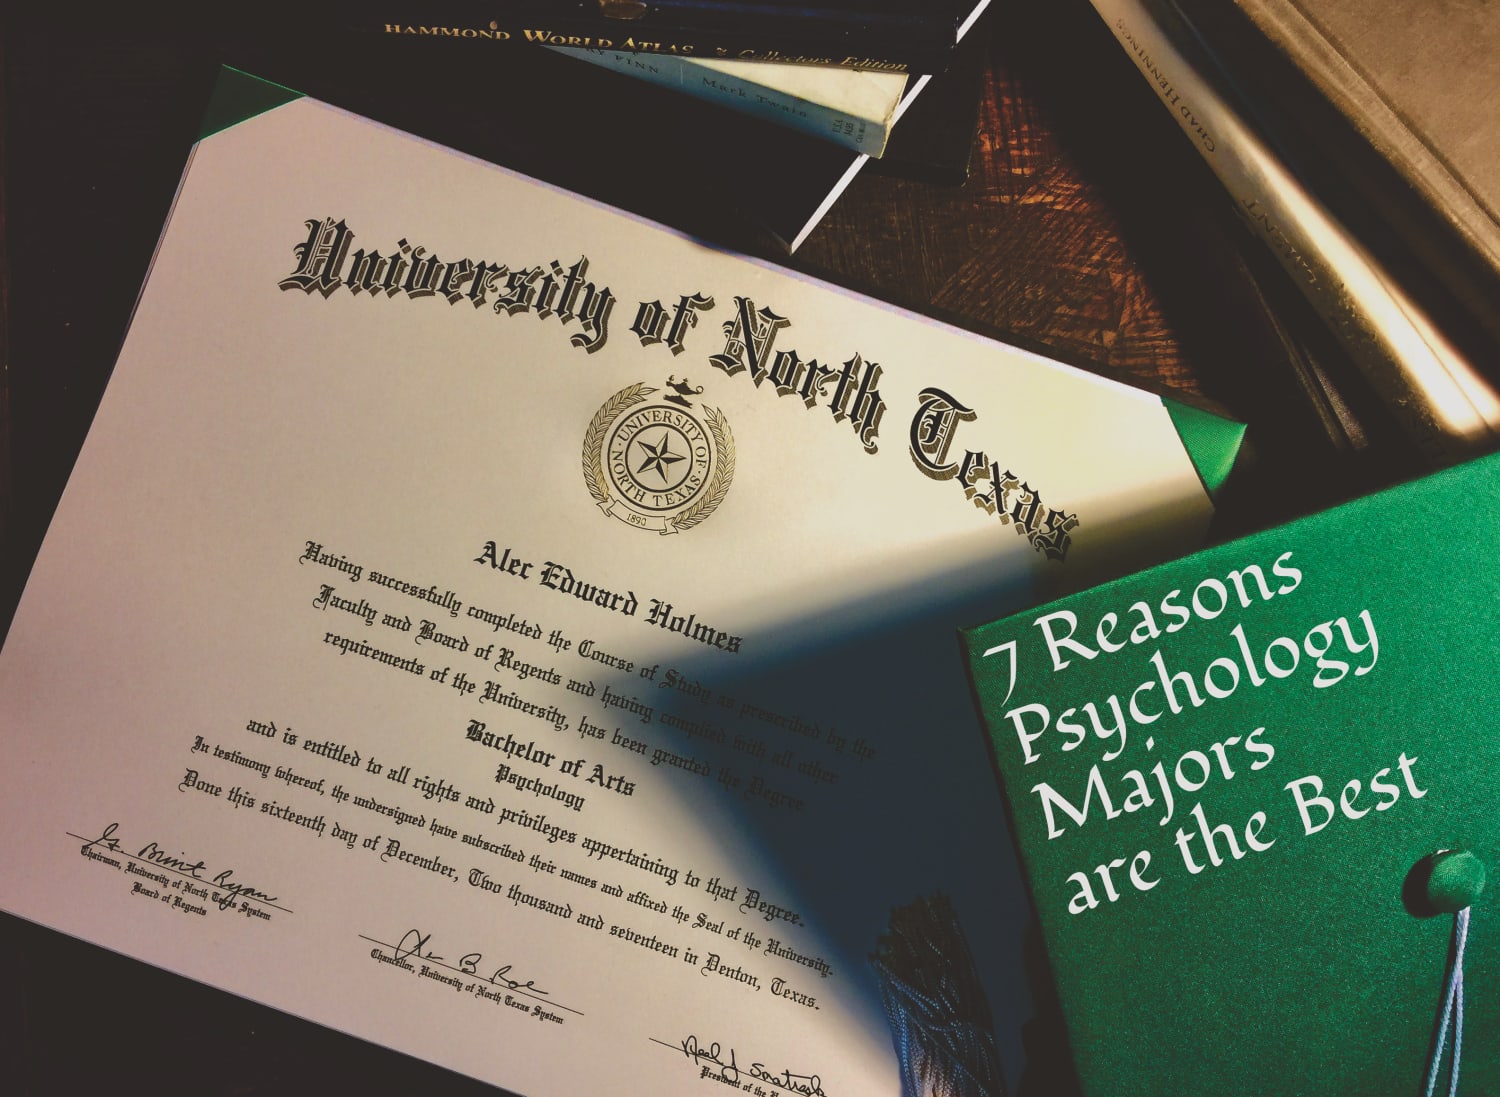 7 Reasons Psychology Majors are the Best